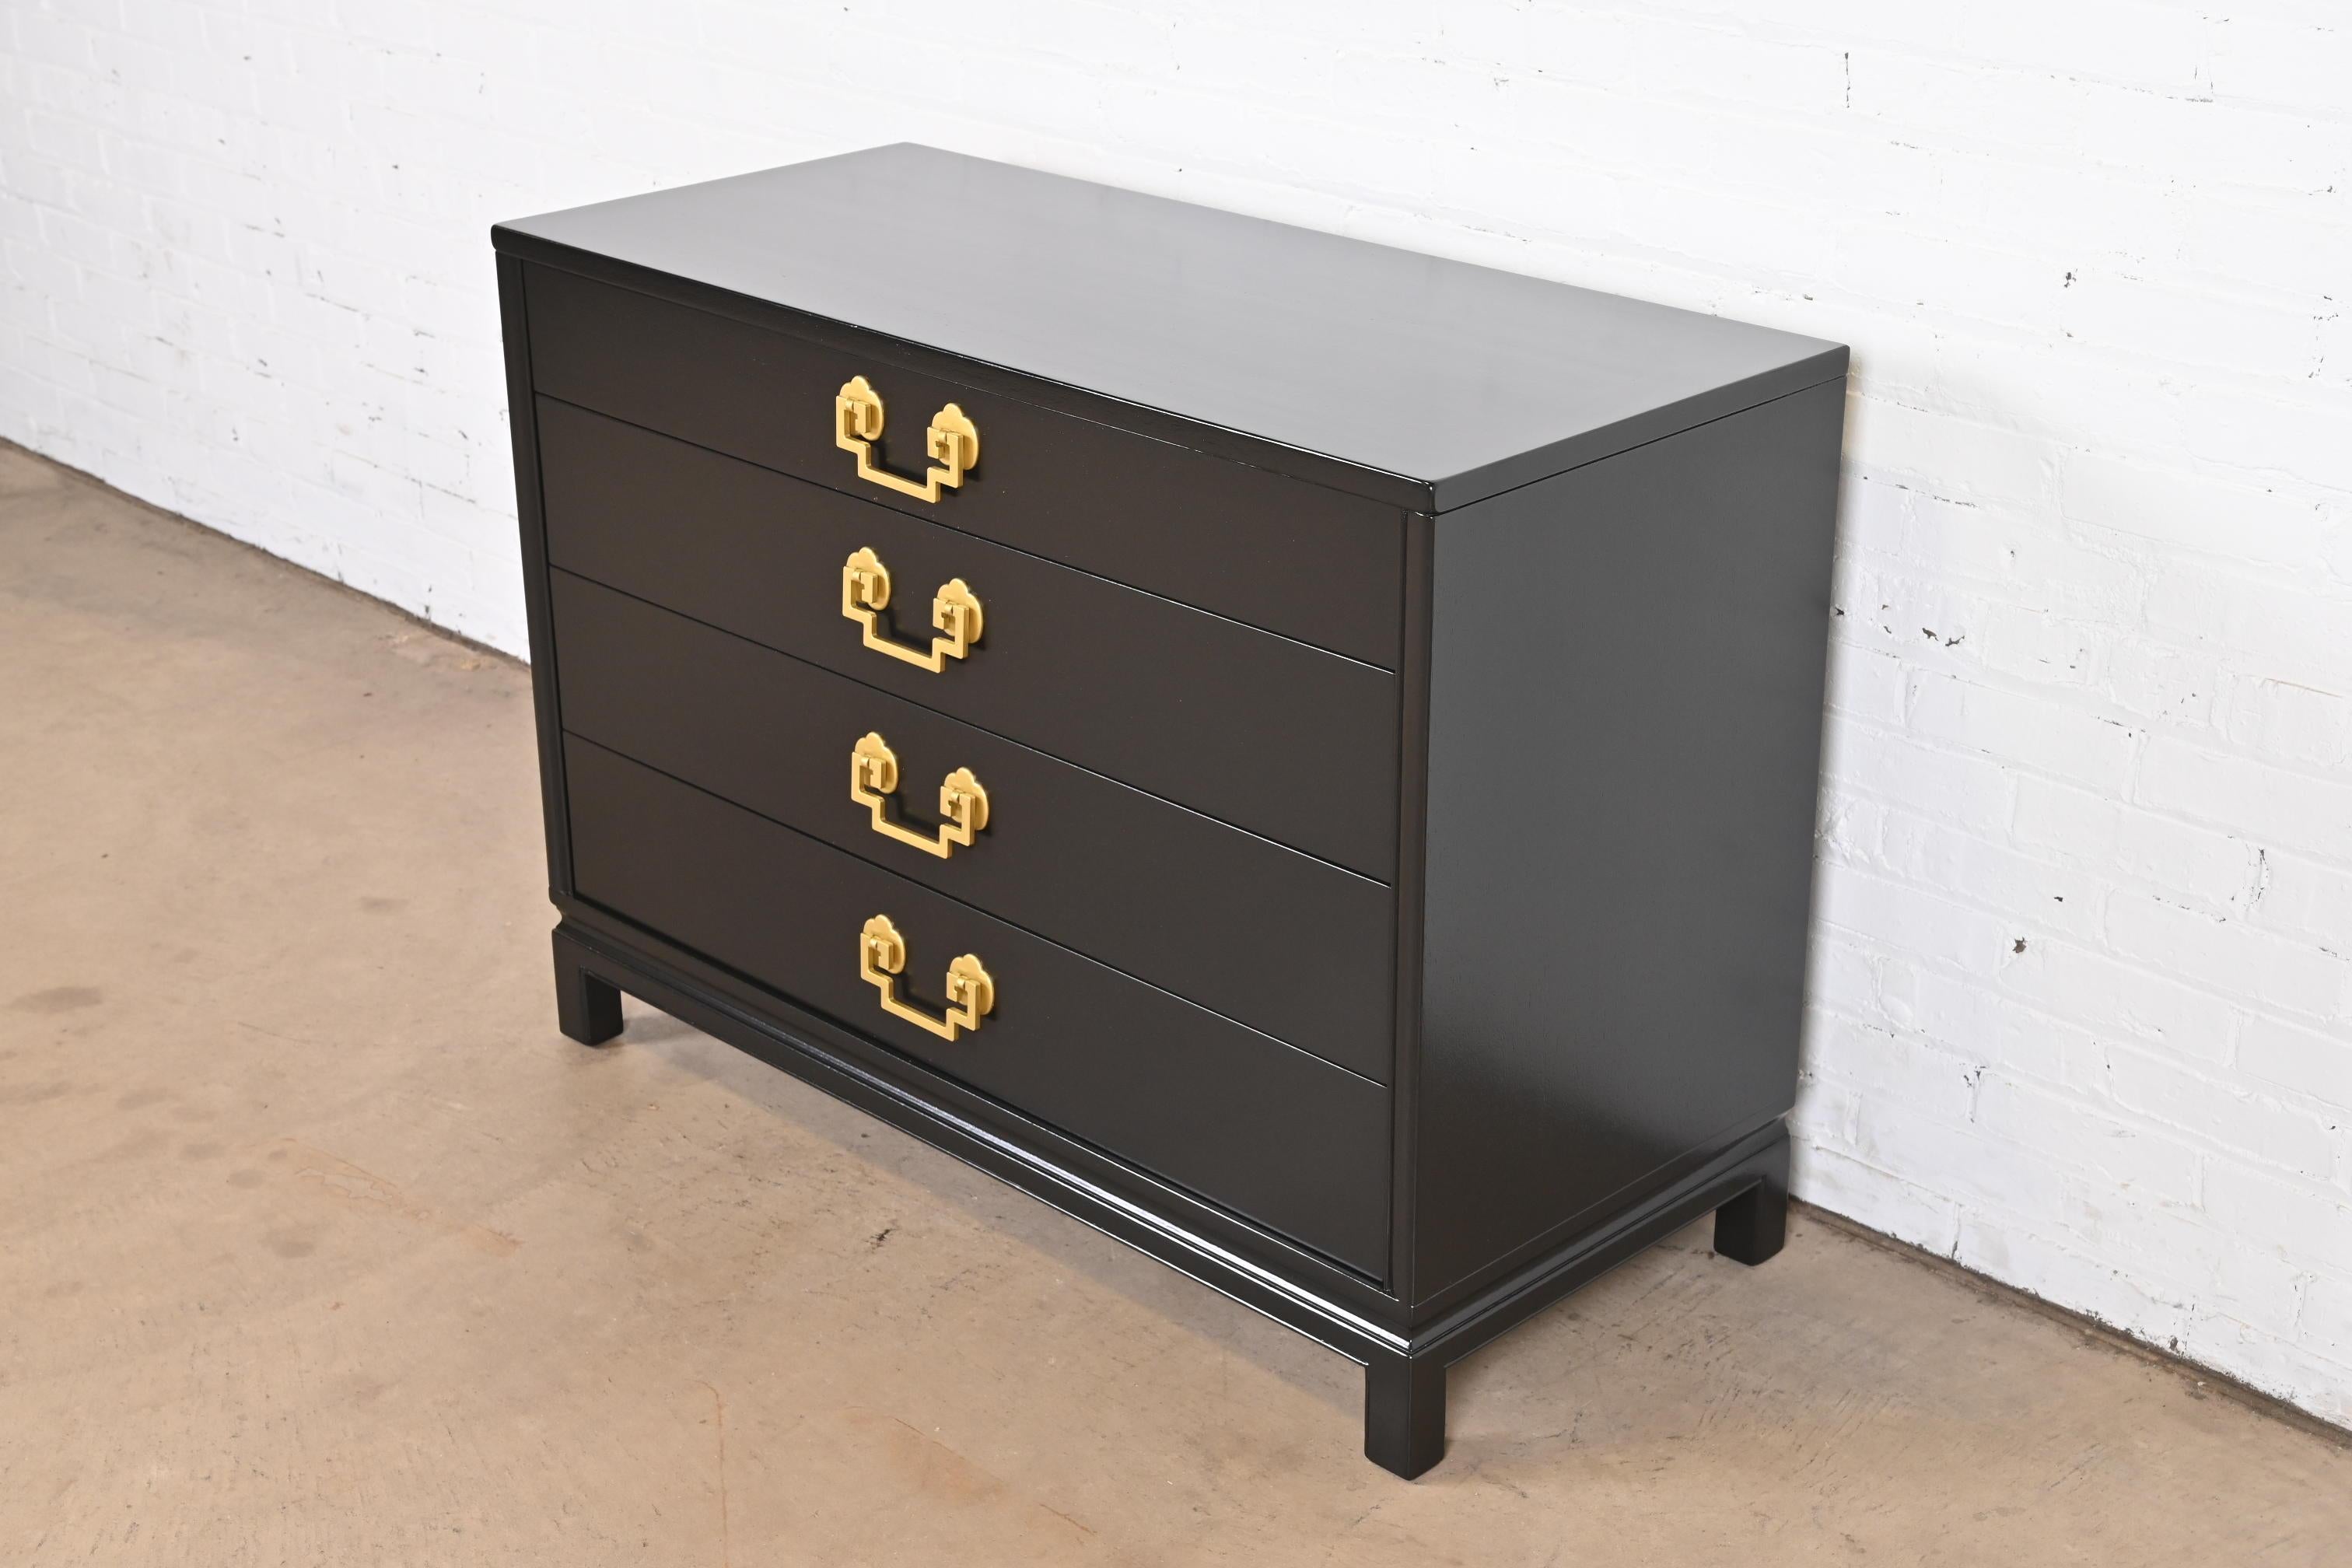 American Landstrom Mid-Century Modern Hollywood Regency Black Lacquered Chest of Drawers